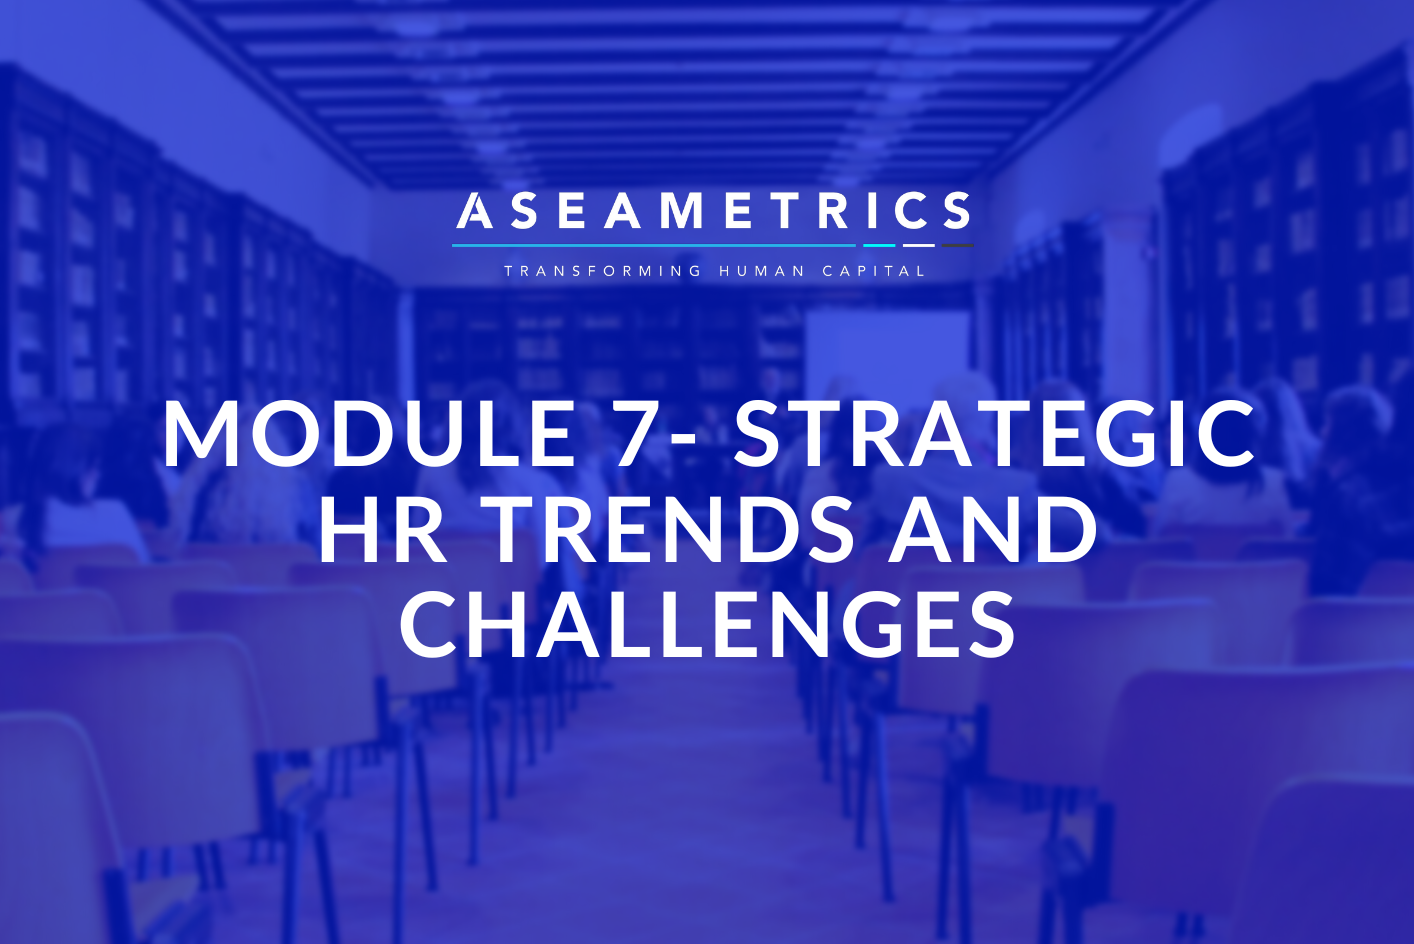 MODULE 7- STRATEGIC HR TRENDS AND CHALLENGES